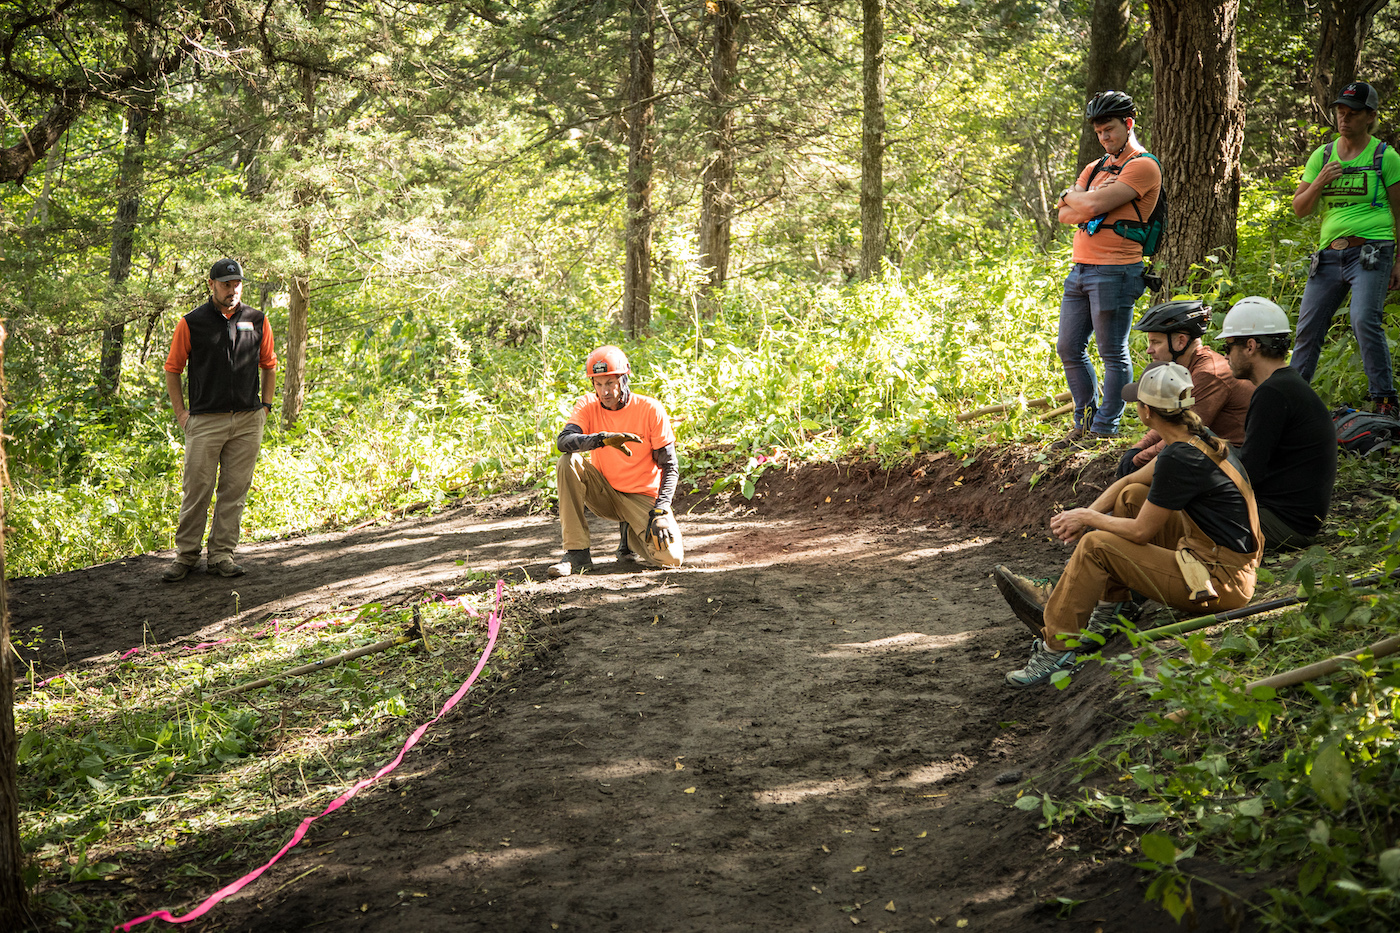 IMBA Trail Solutions hosting a Trail Care School in Omaha